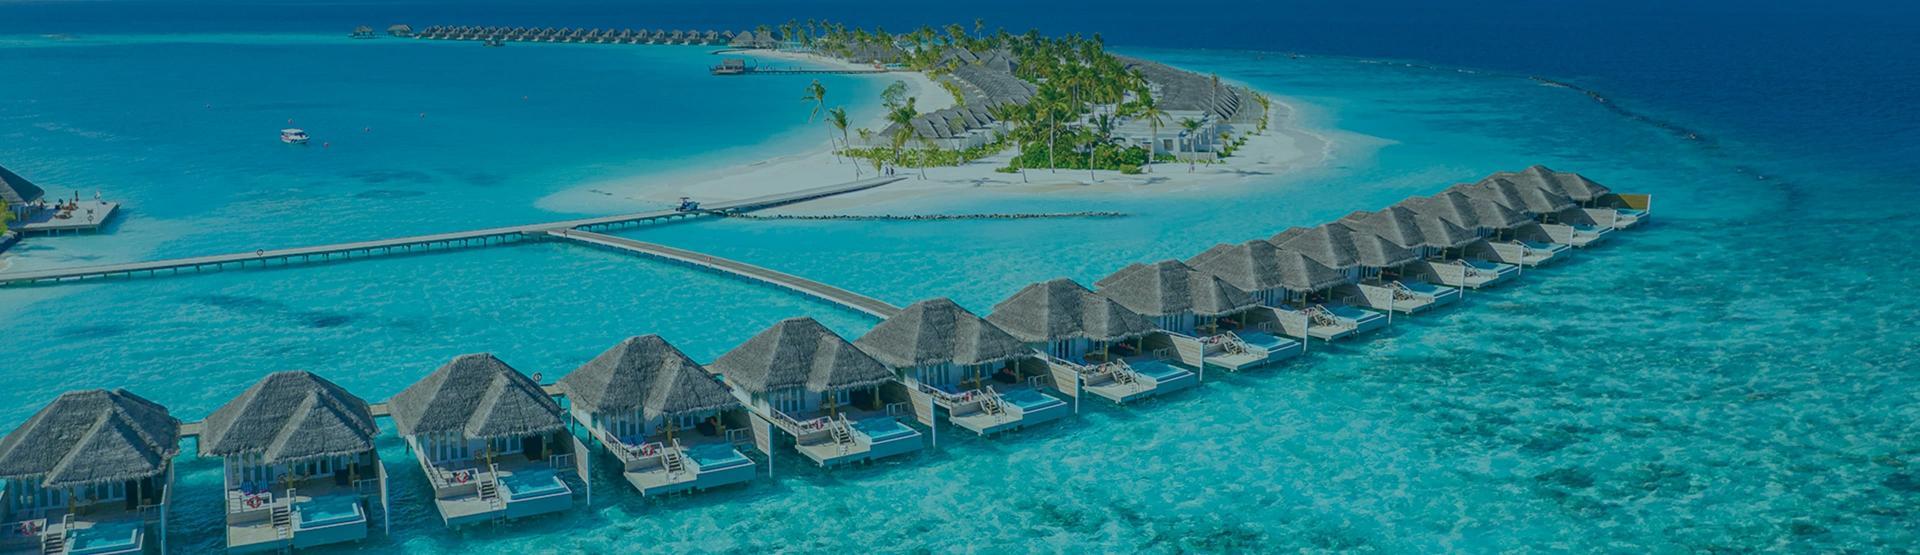 Search Hotels in Maldives